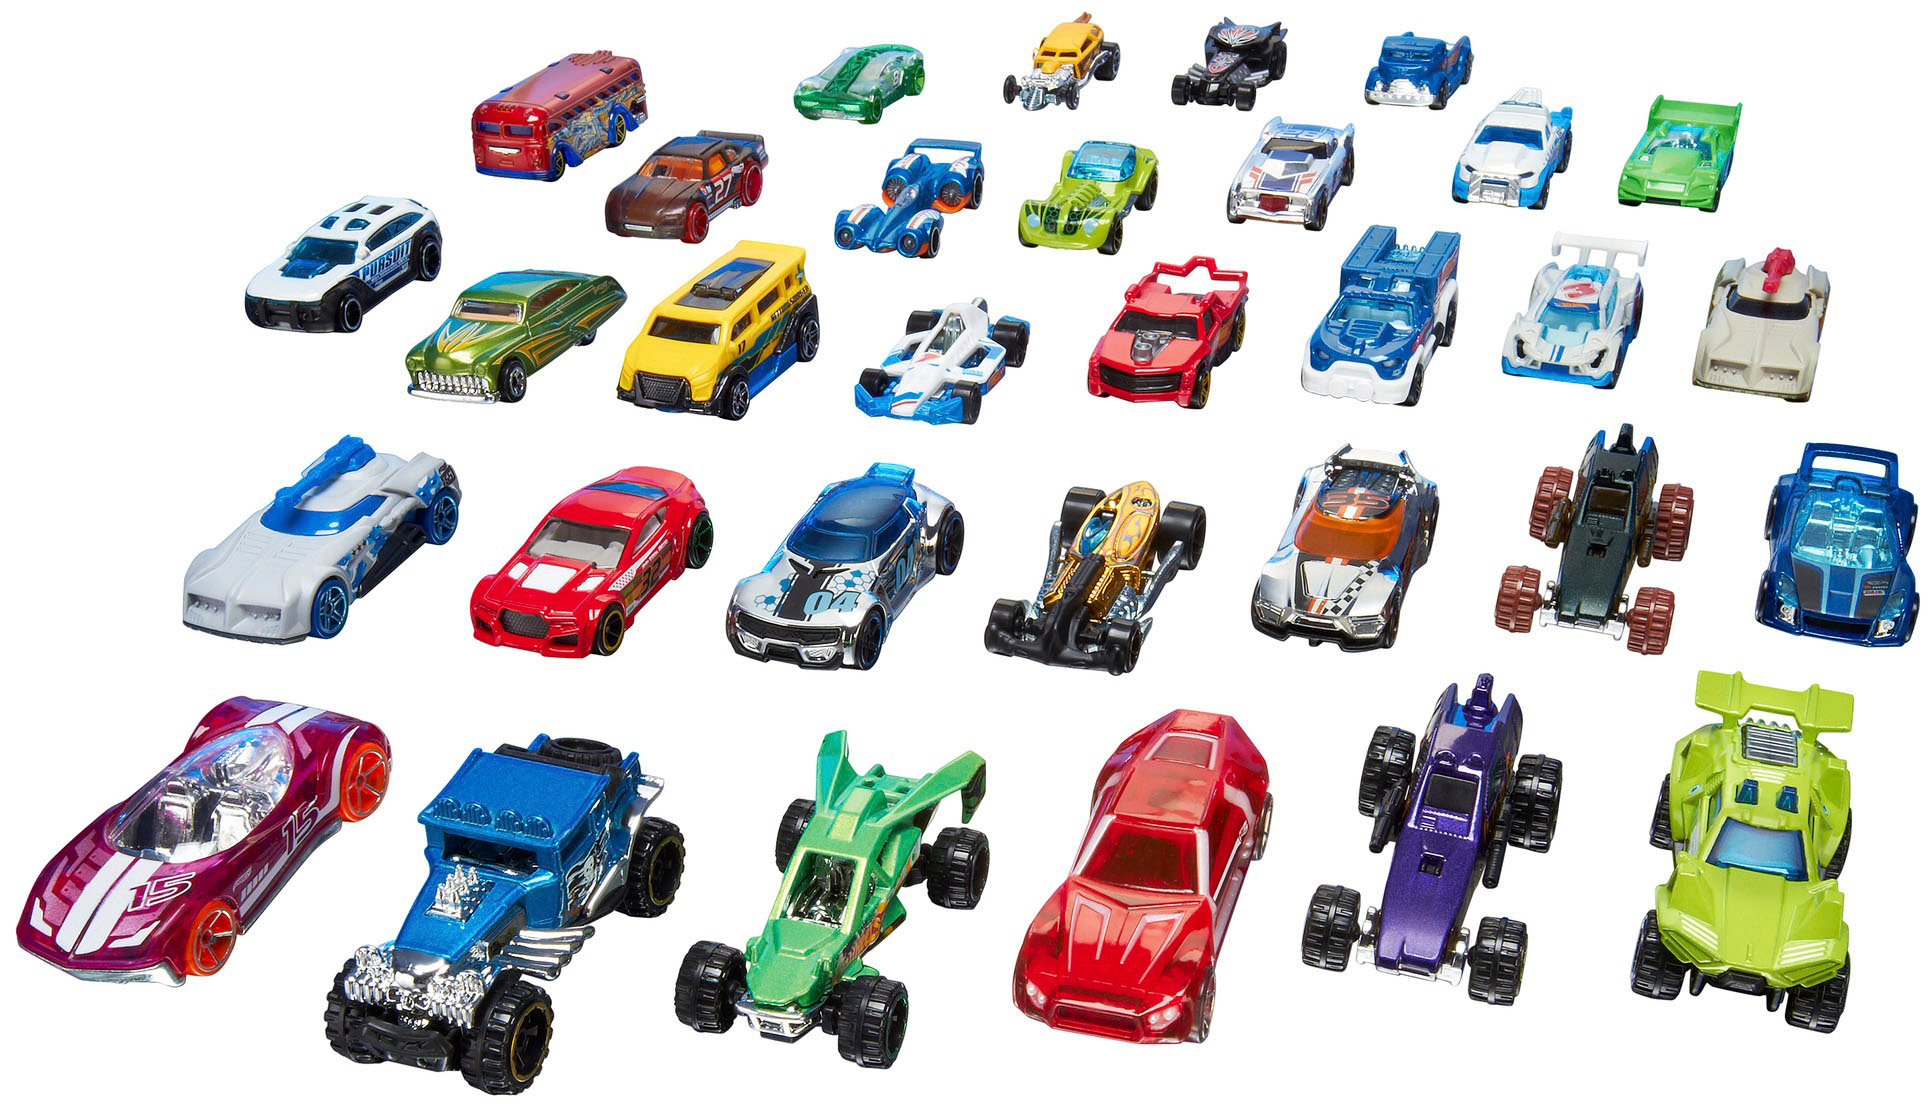 Hot Wheels 20 Gift Pack (Styles May Vary), Color: Multi - JCPenney